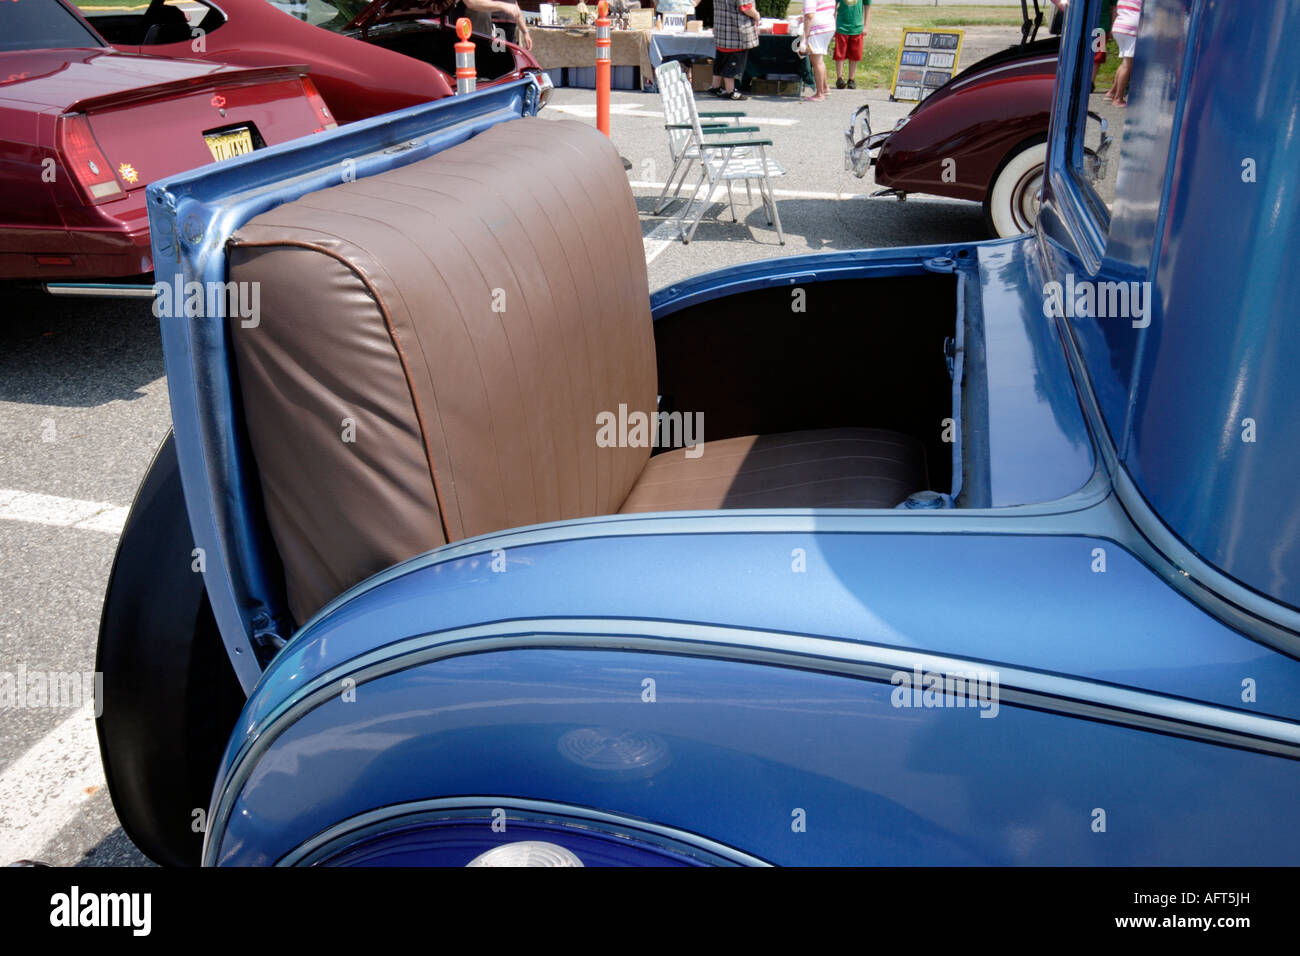 https://c8.alamy.com/comp/AFT5JH/rumble-seat-on-old-american-car-AFT5JH.jpg